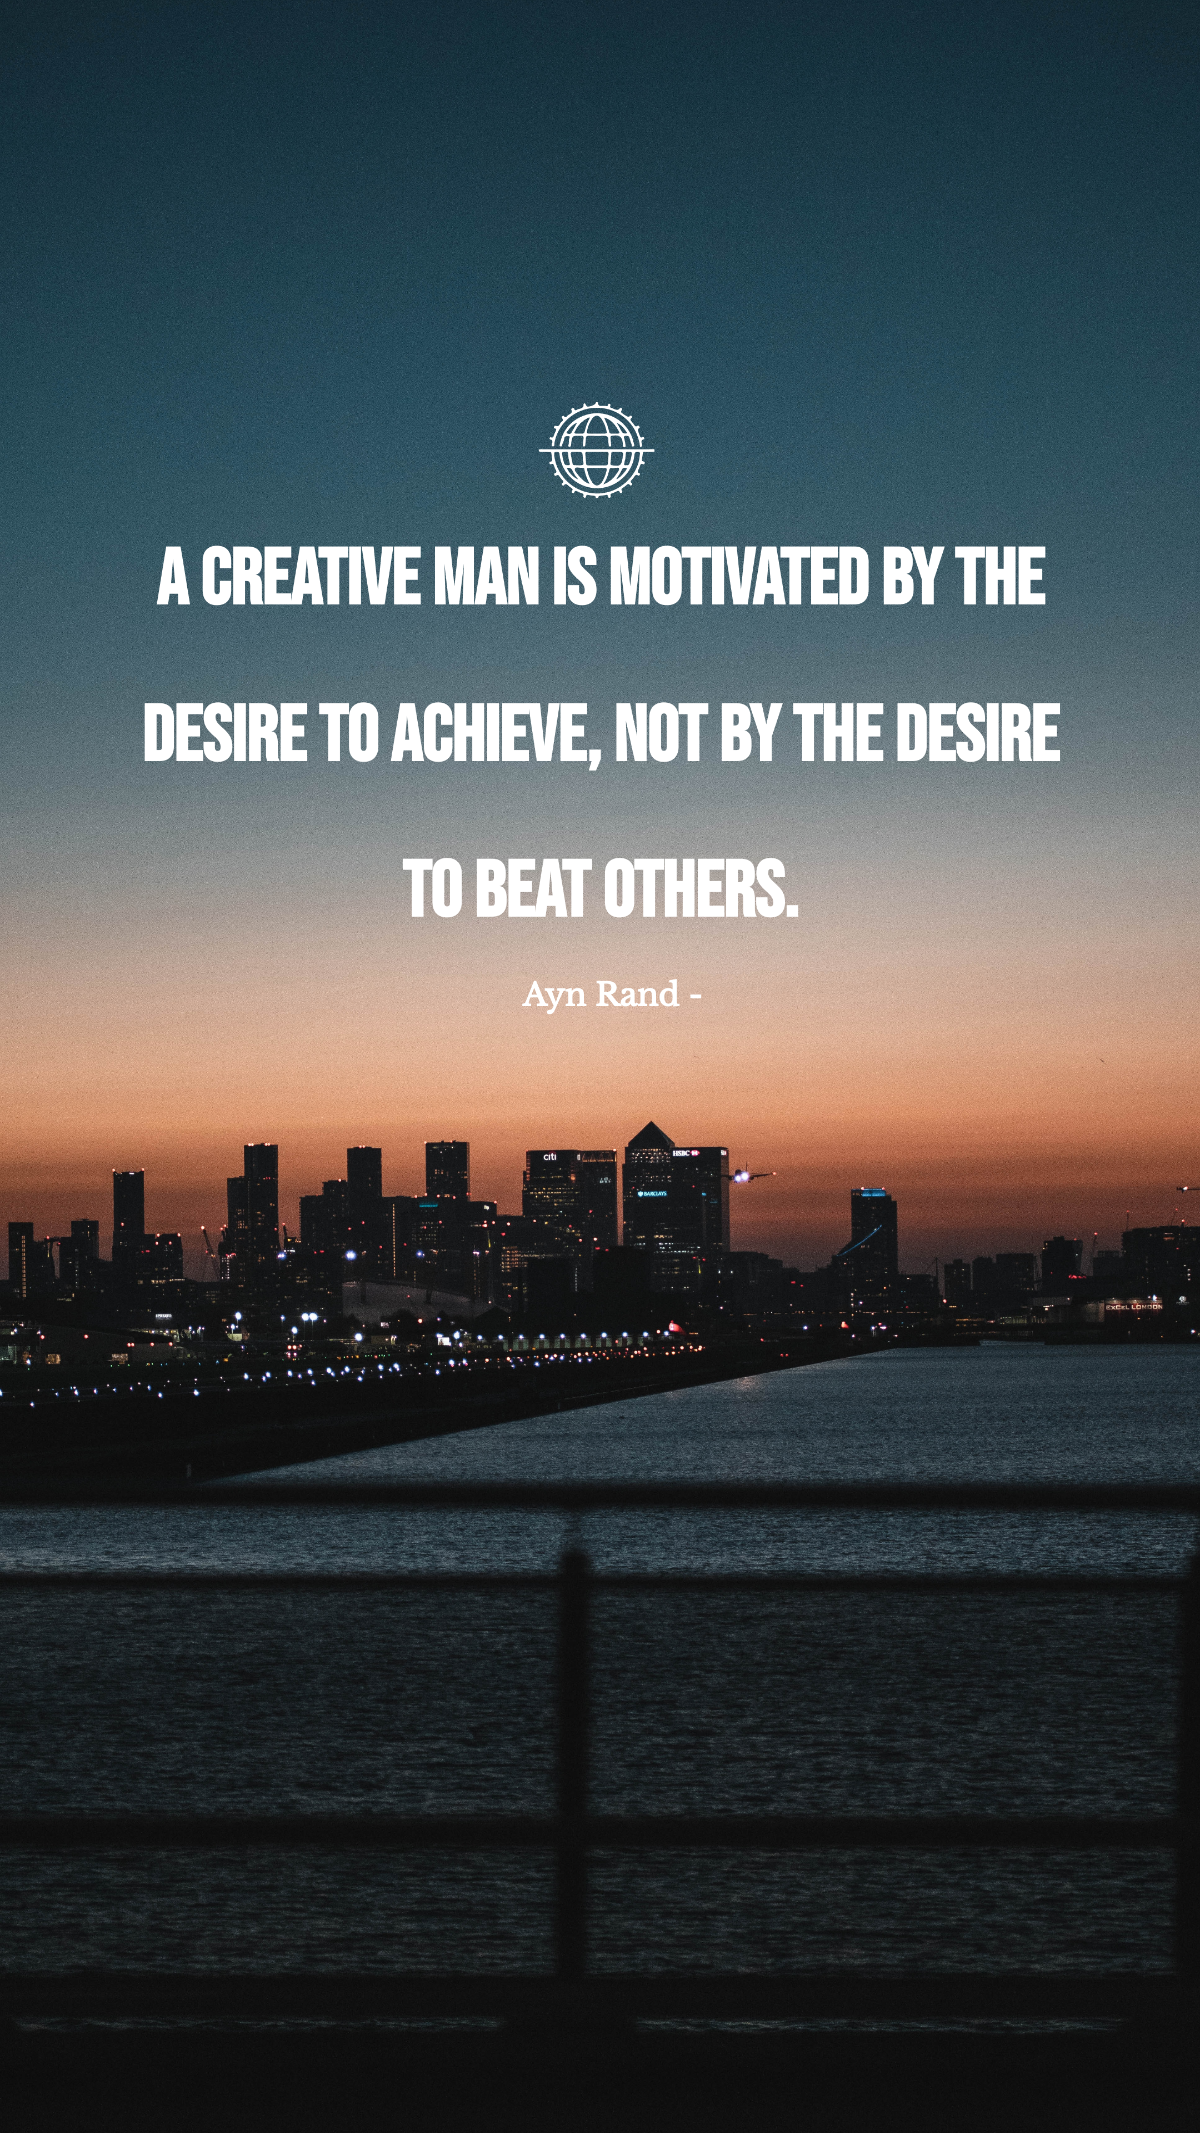 Ayn Rand - A creative man is motivated by the desire to achieve, not by the desire to beat others.